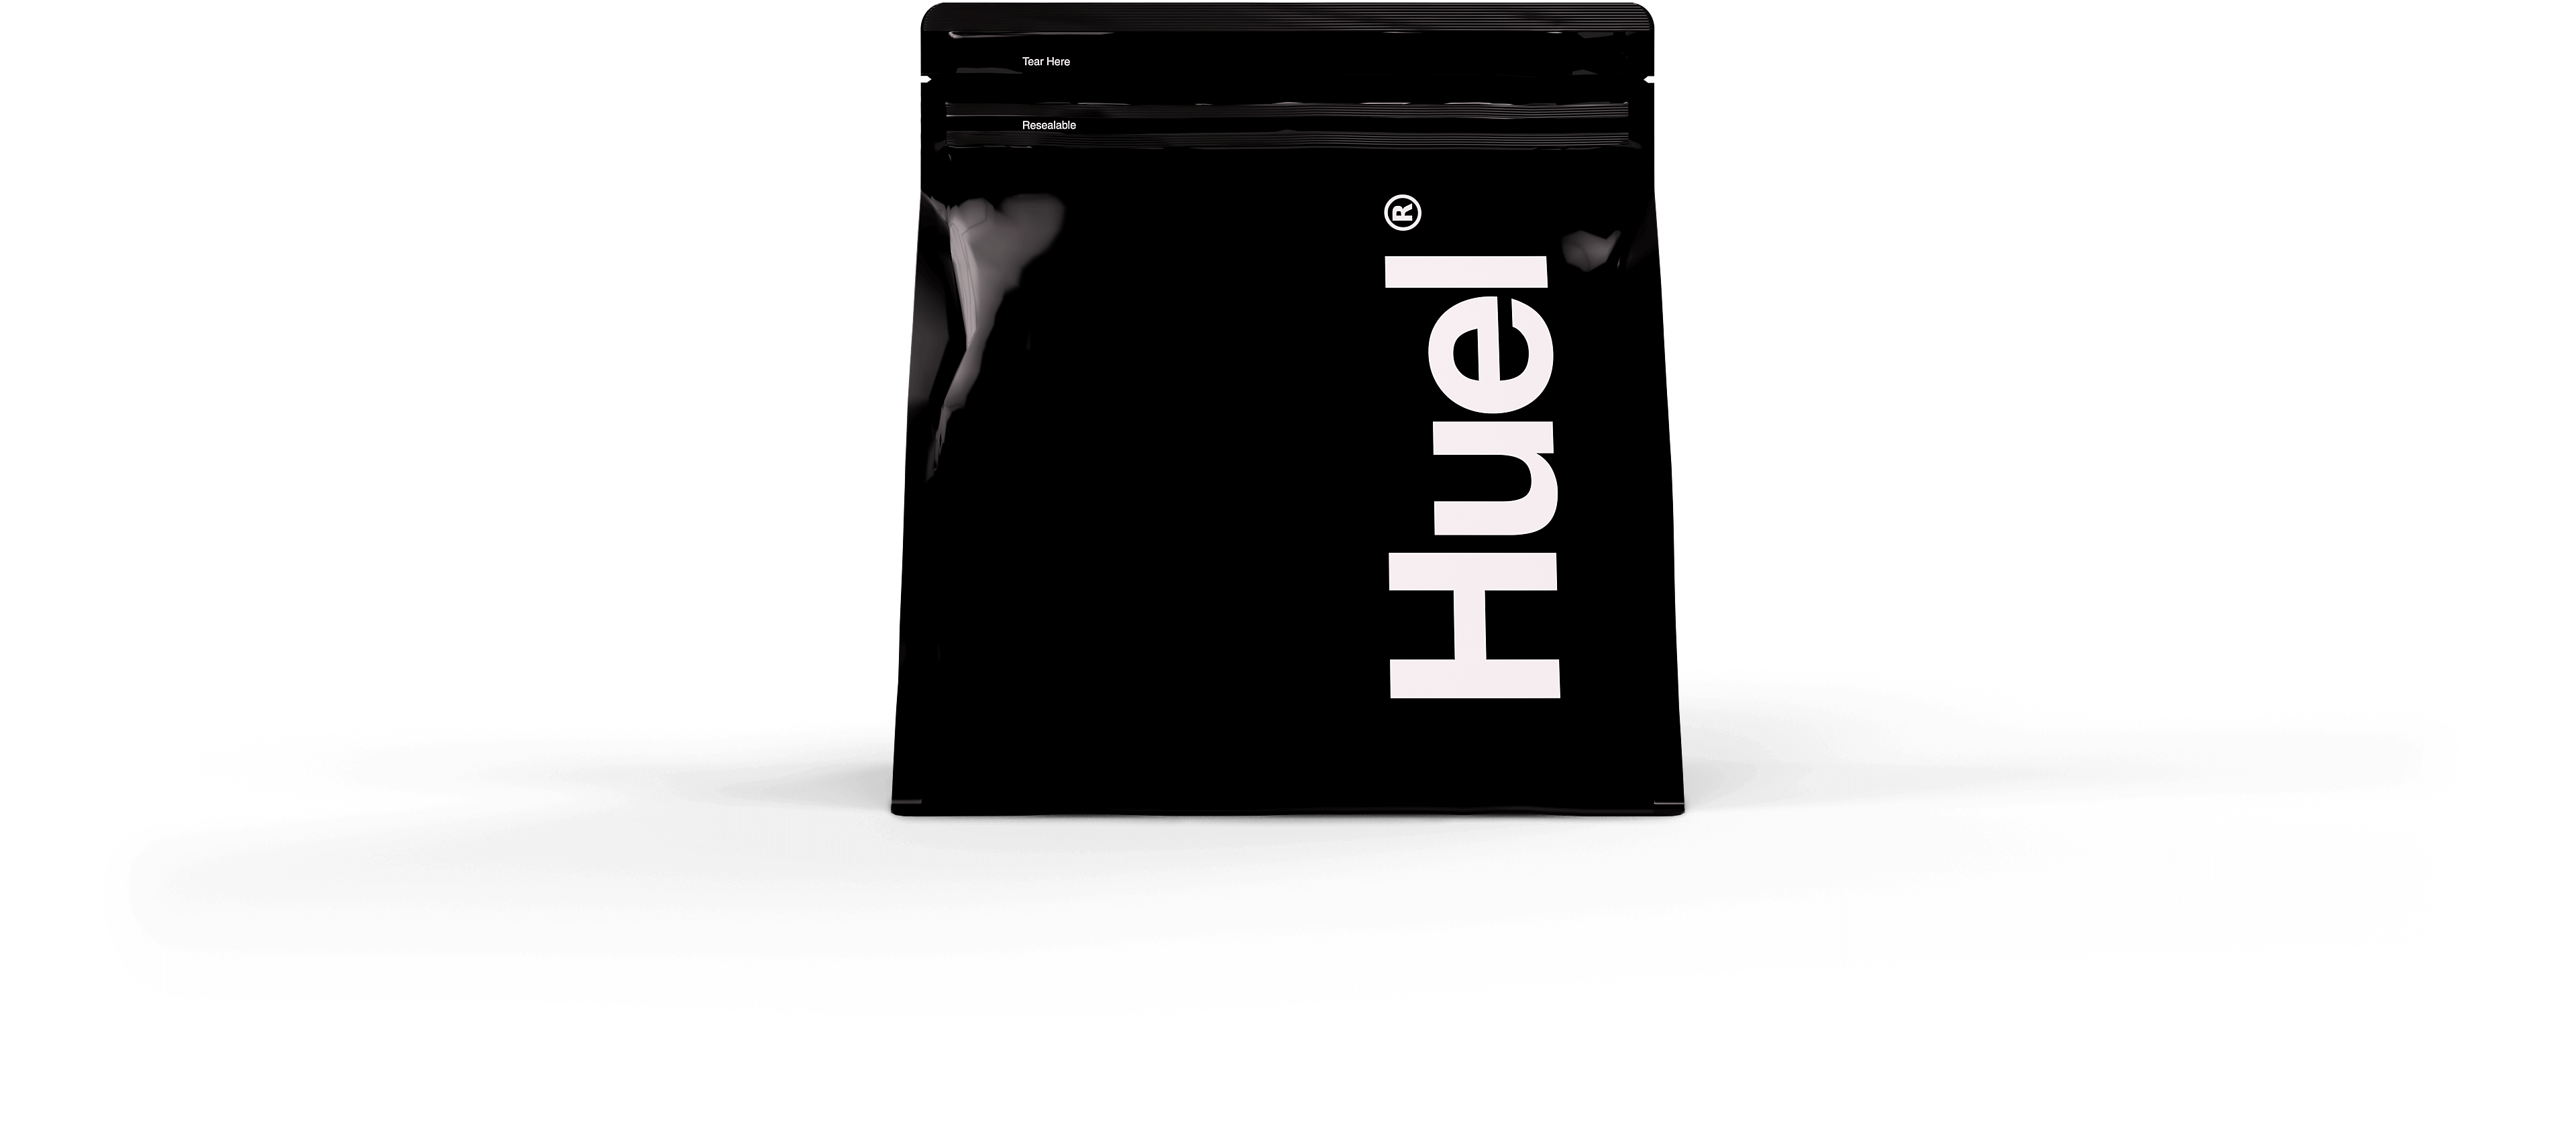 Build muscle the healthy way with Huel